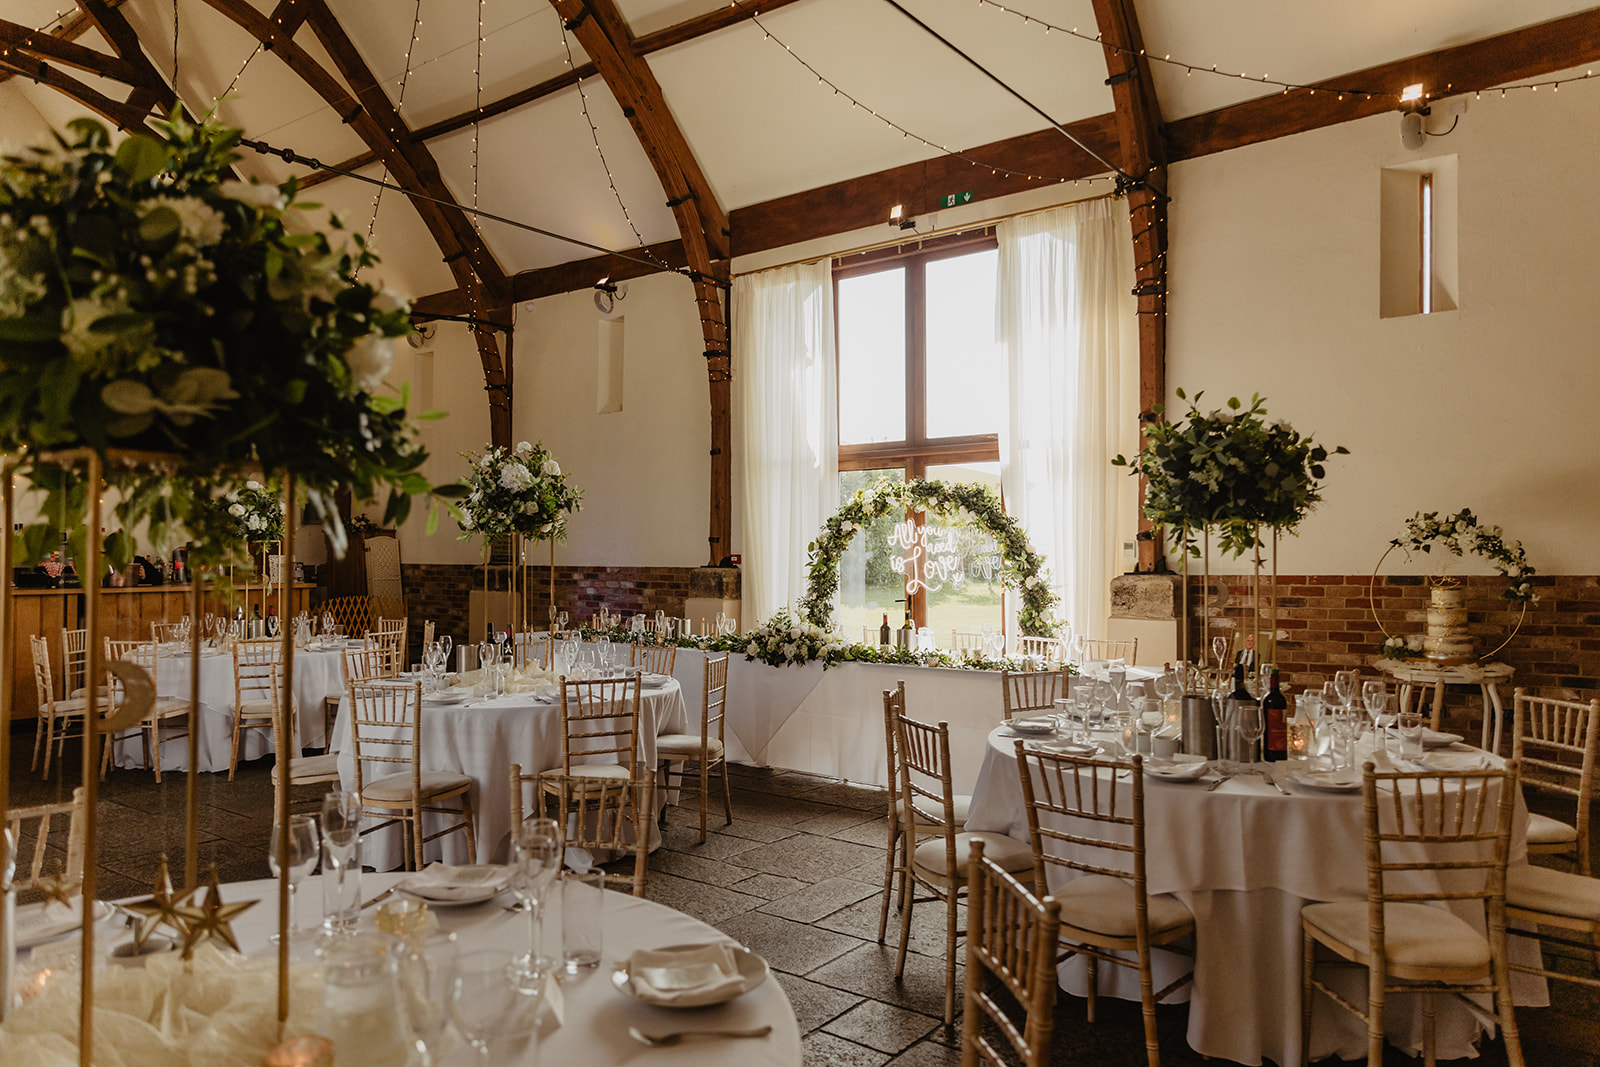 Wedding reception at a Long Furlong Barn Wedding in Worthing, Sussex. By Olive Joy Photography.